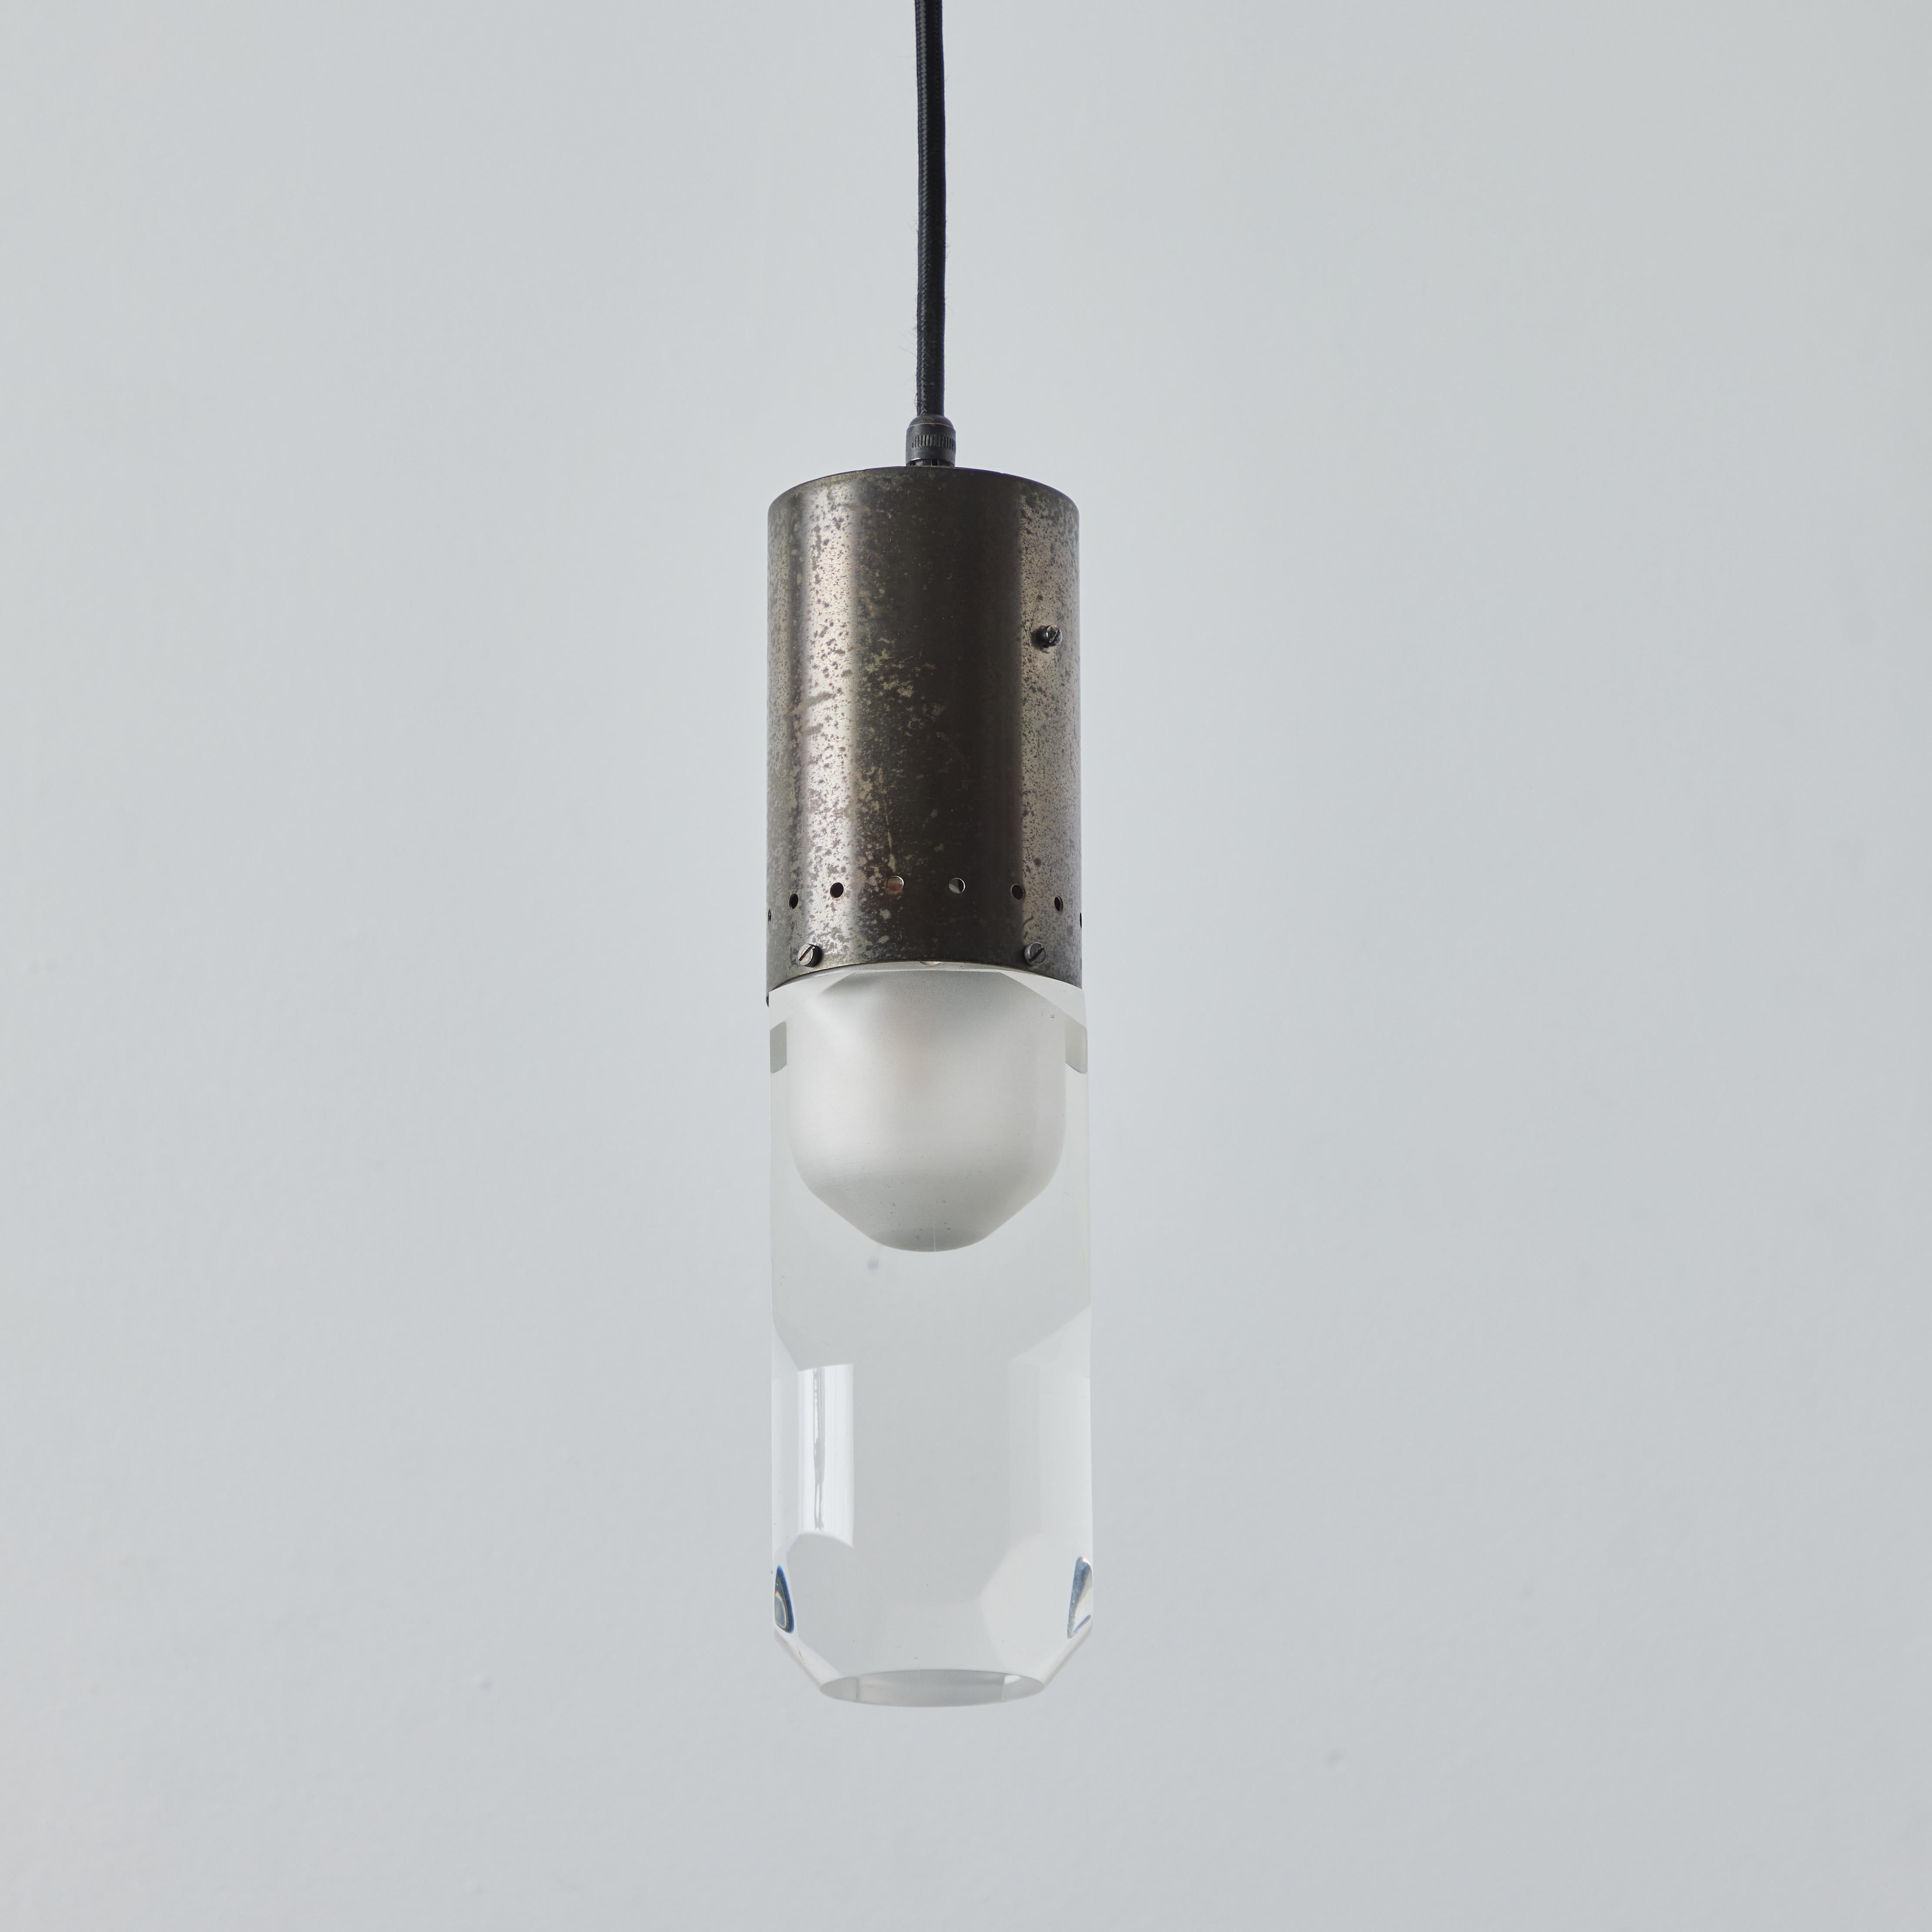 1960s Faceted Diffuser Pendant Lamp Attributed to Stilnovo For Sale 2